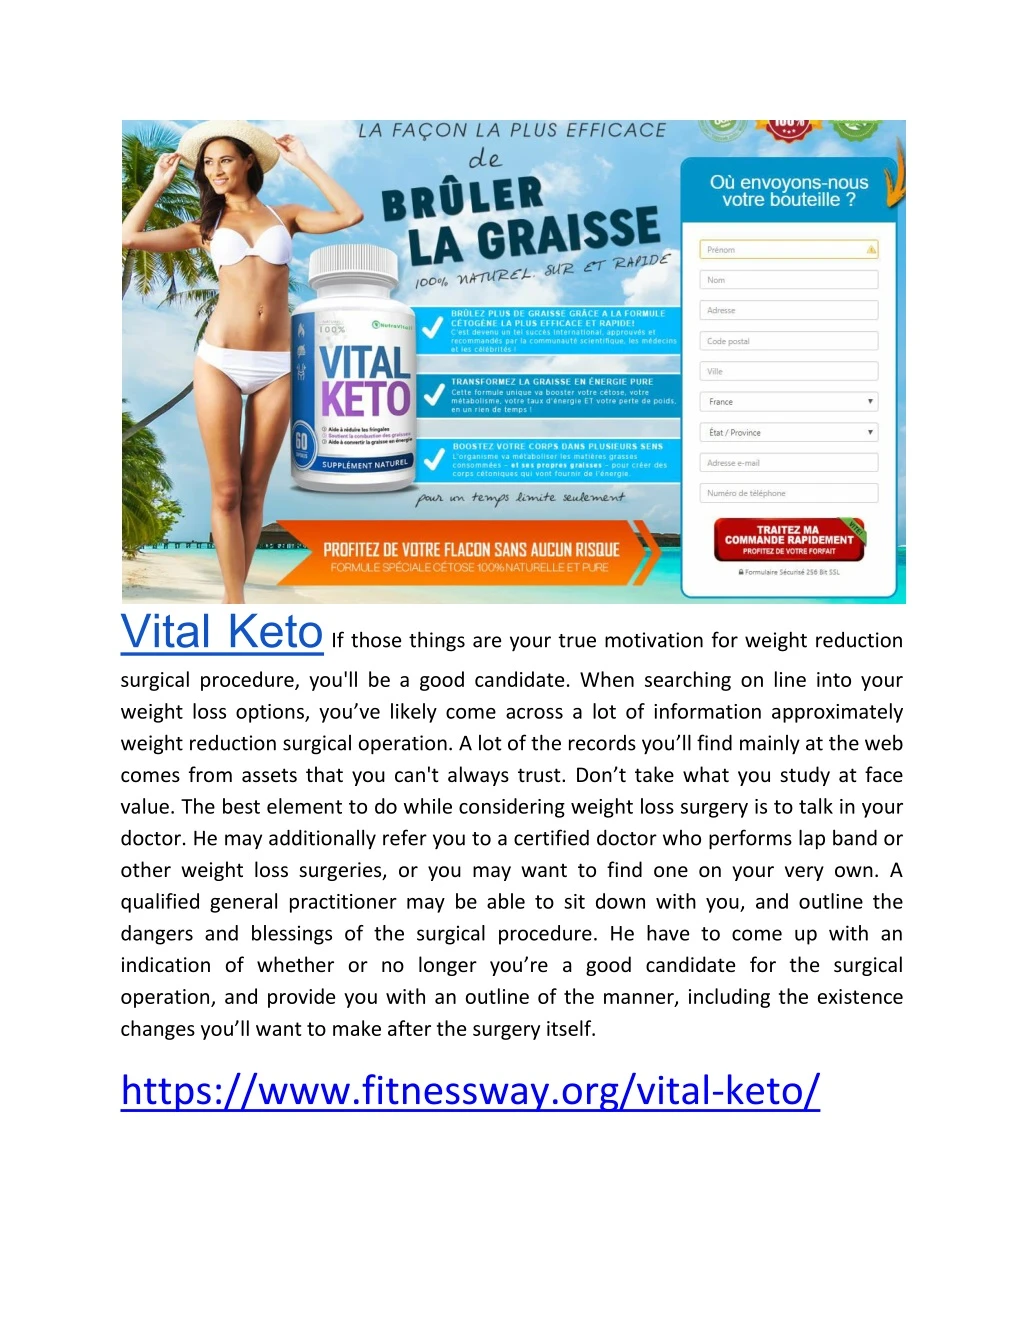 vital keto if those things are your true